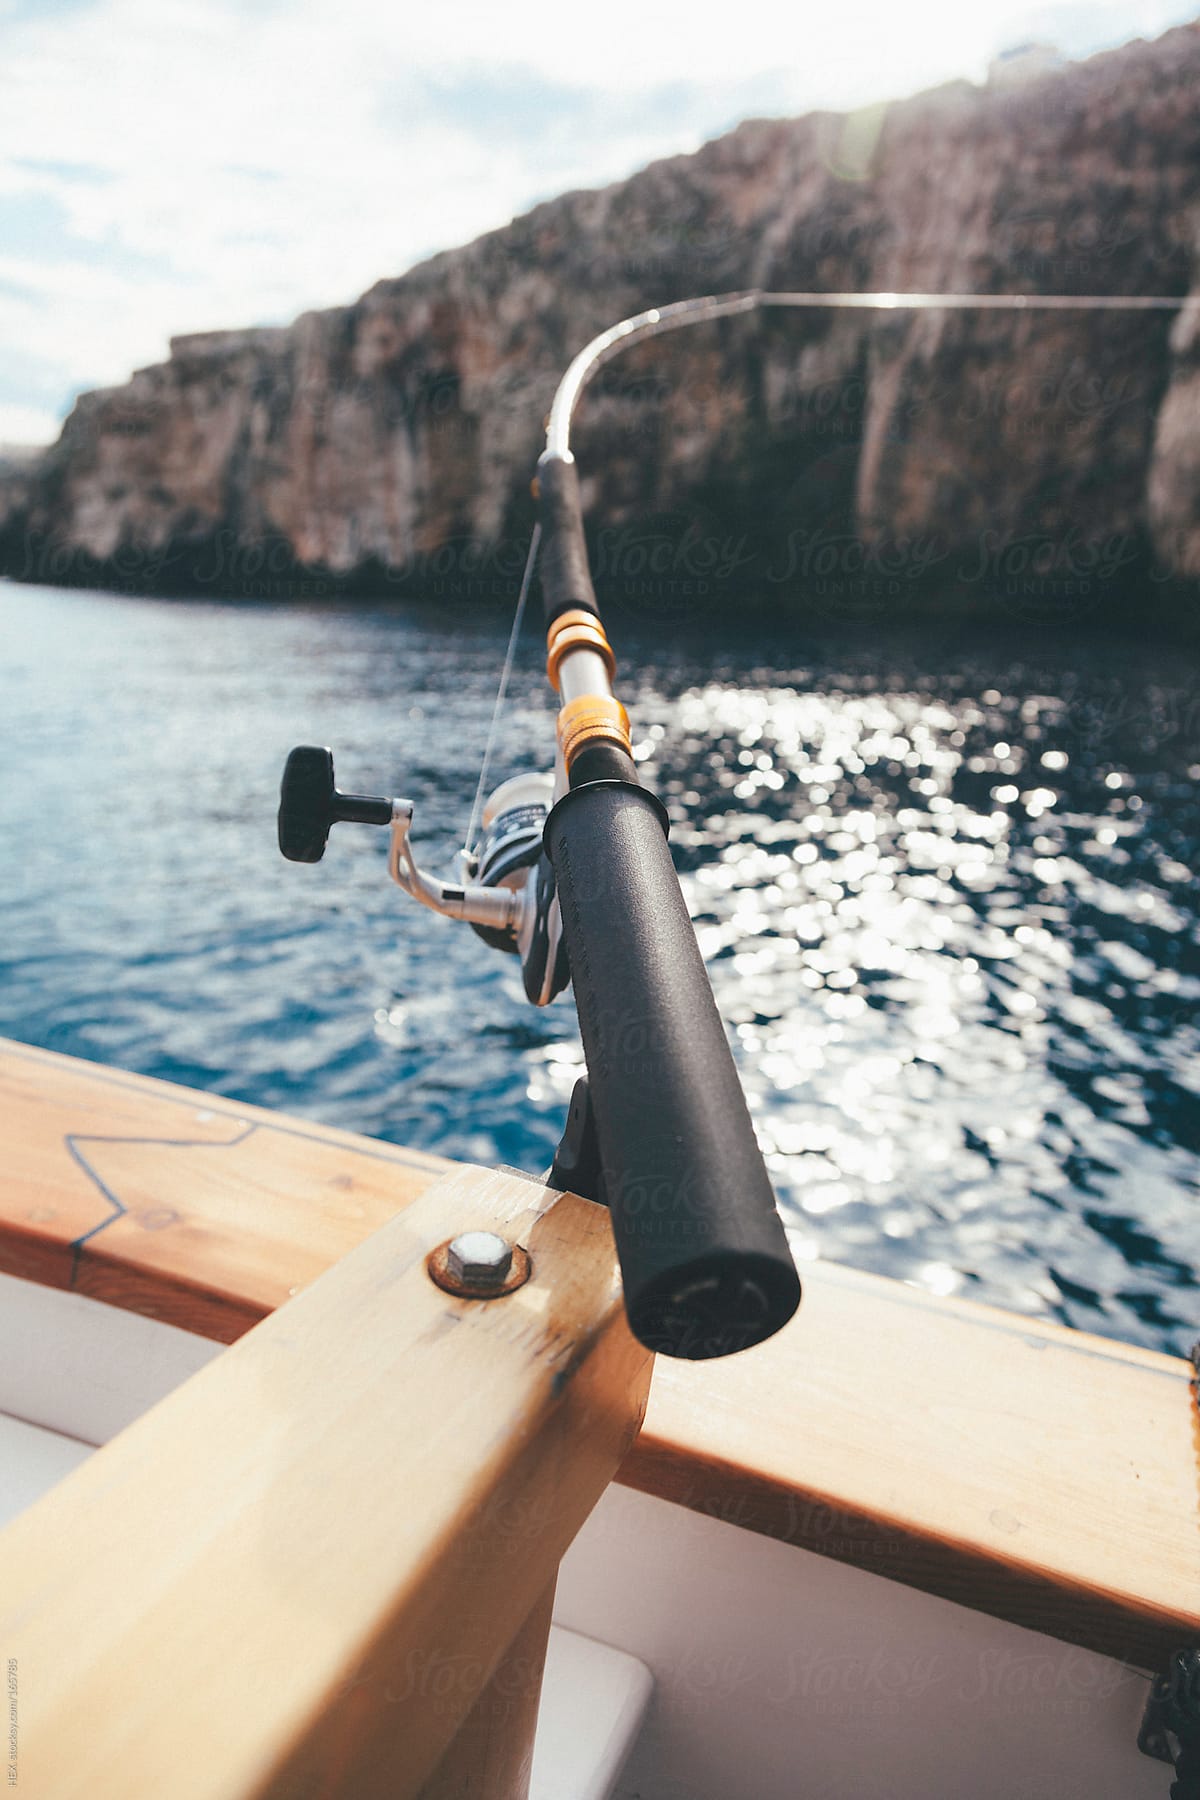 Flexible Fishing Pole on the Boat